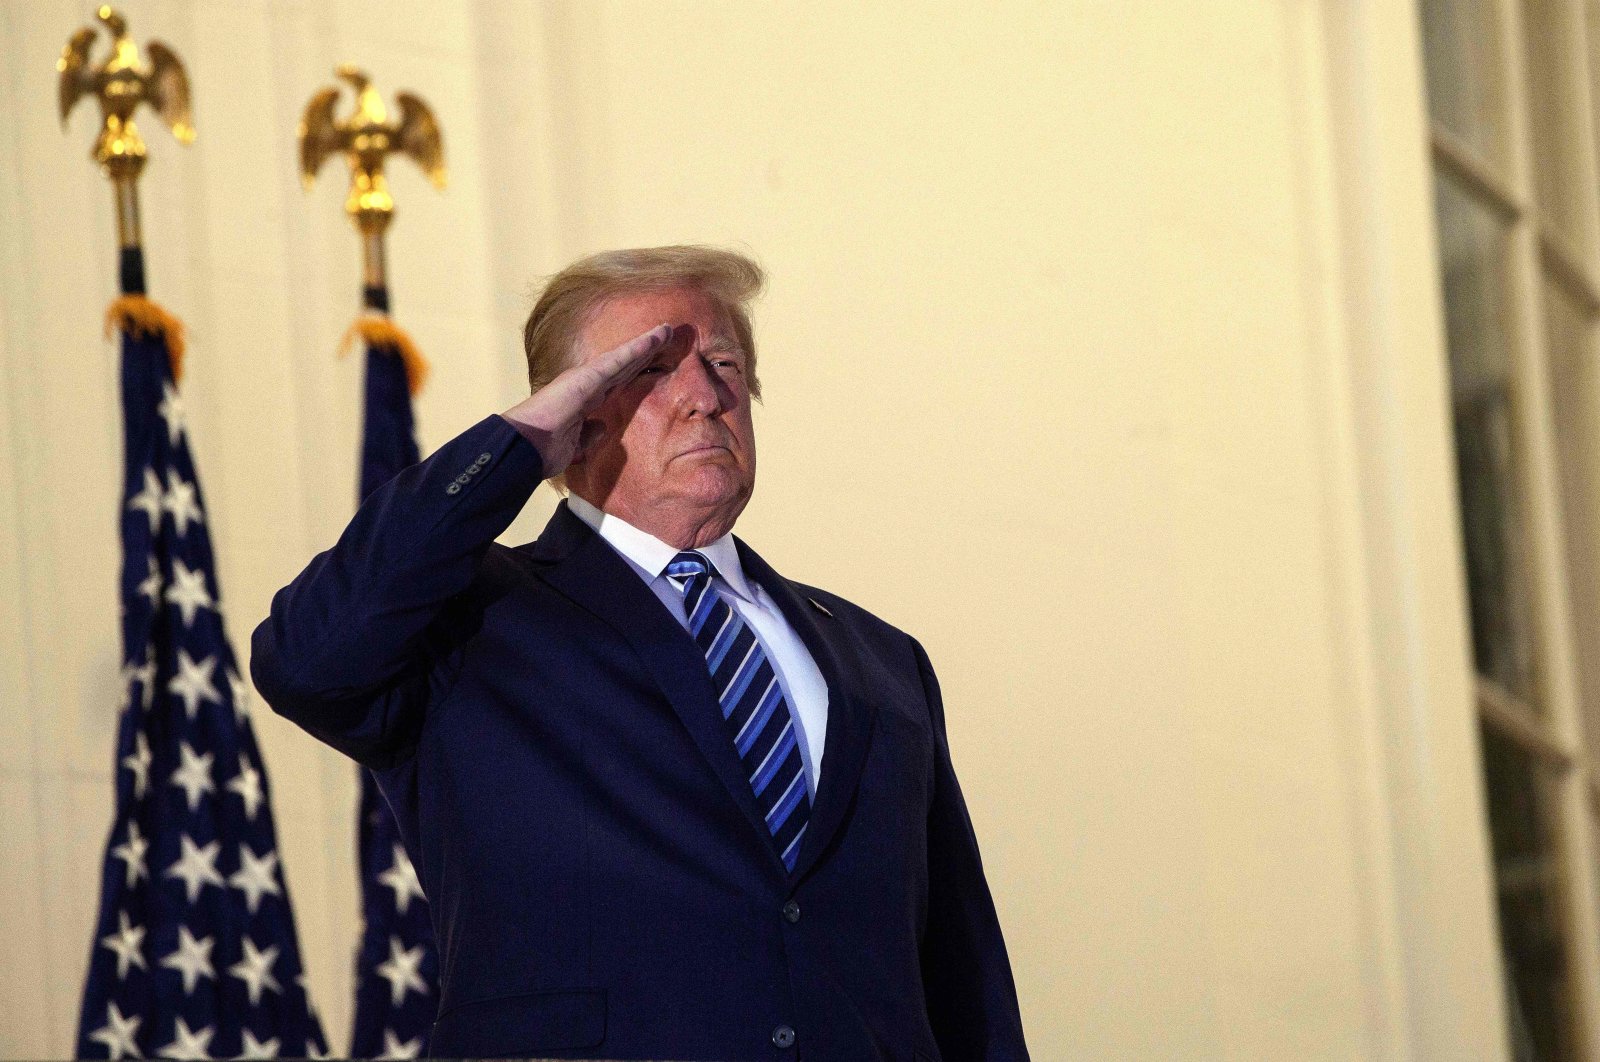 U.S. President Donald Trump salutes from the Truman Balcony upon his return to the White House from Walter Reed Medical Center, Washington, D.C., Oct. 5, 2020. (AFP Photo)